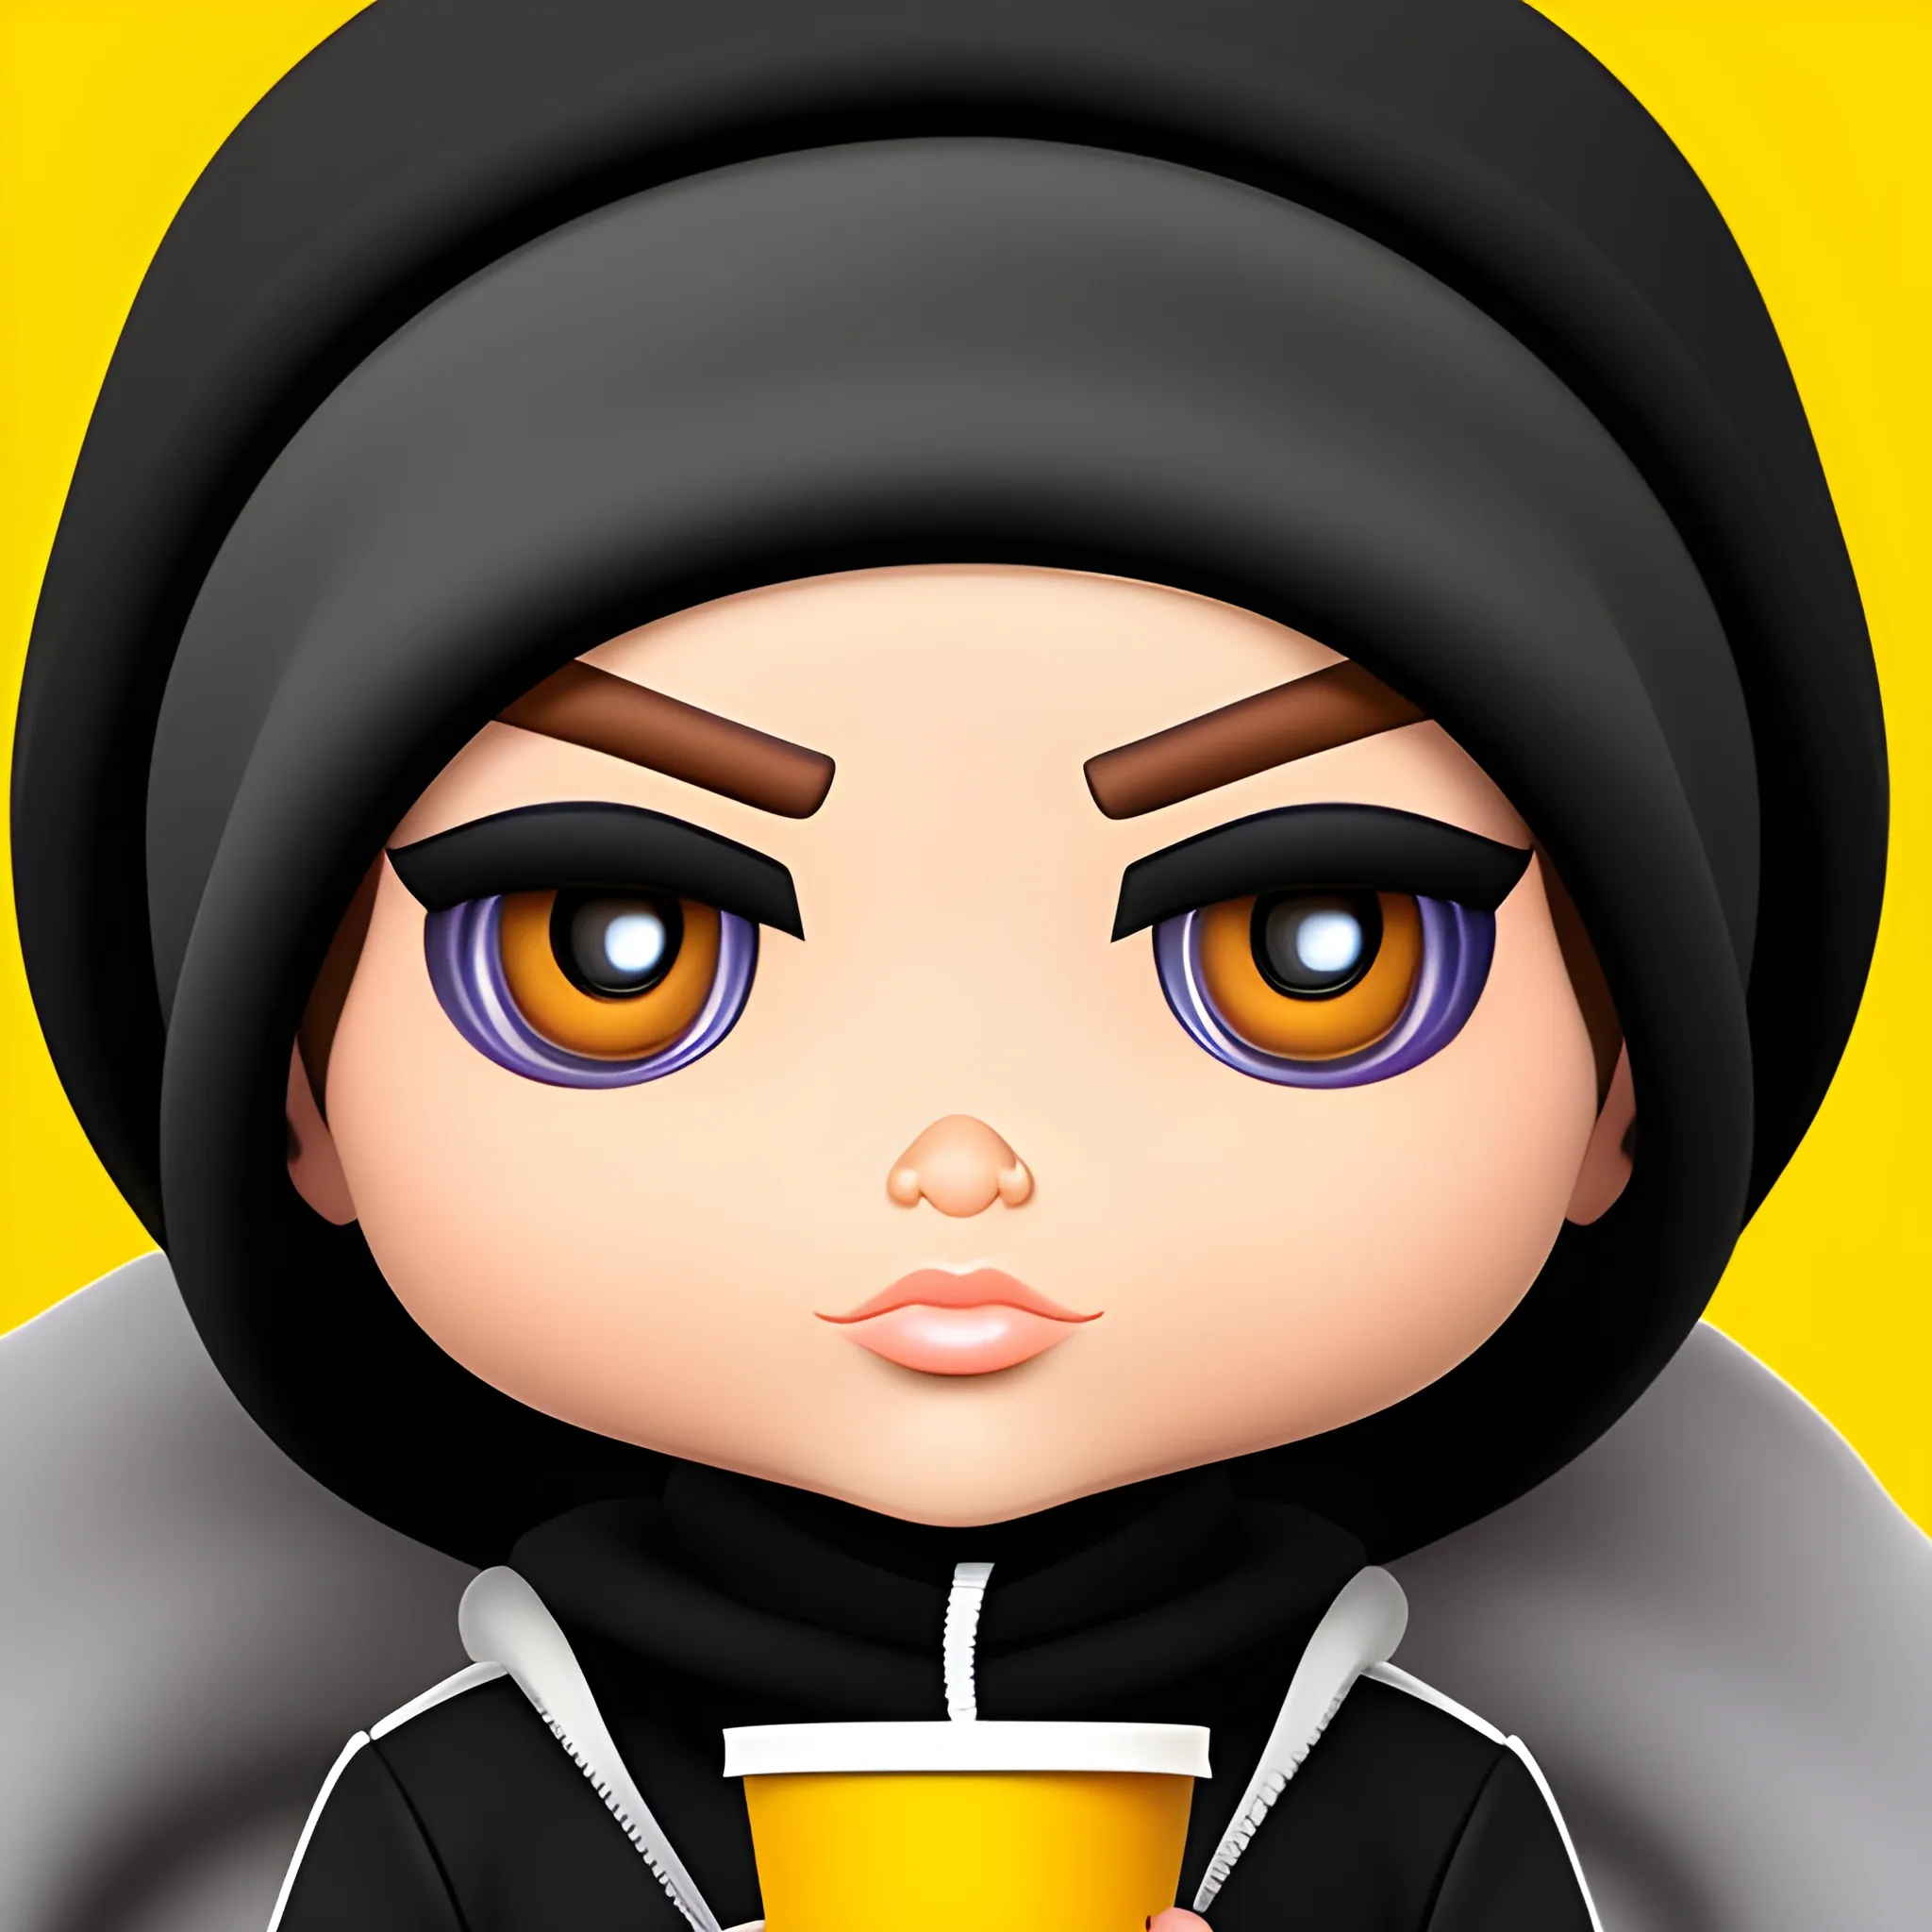 Imagine creating a Bratz-style male character. The character wears a black balaclava. In one hand, he holds a white cup, similar to those used in fast-food chains like McDonald's.
